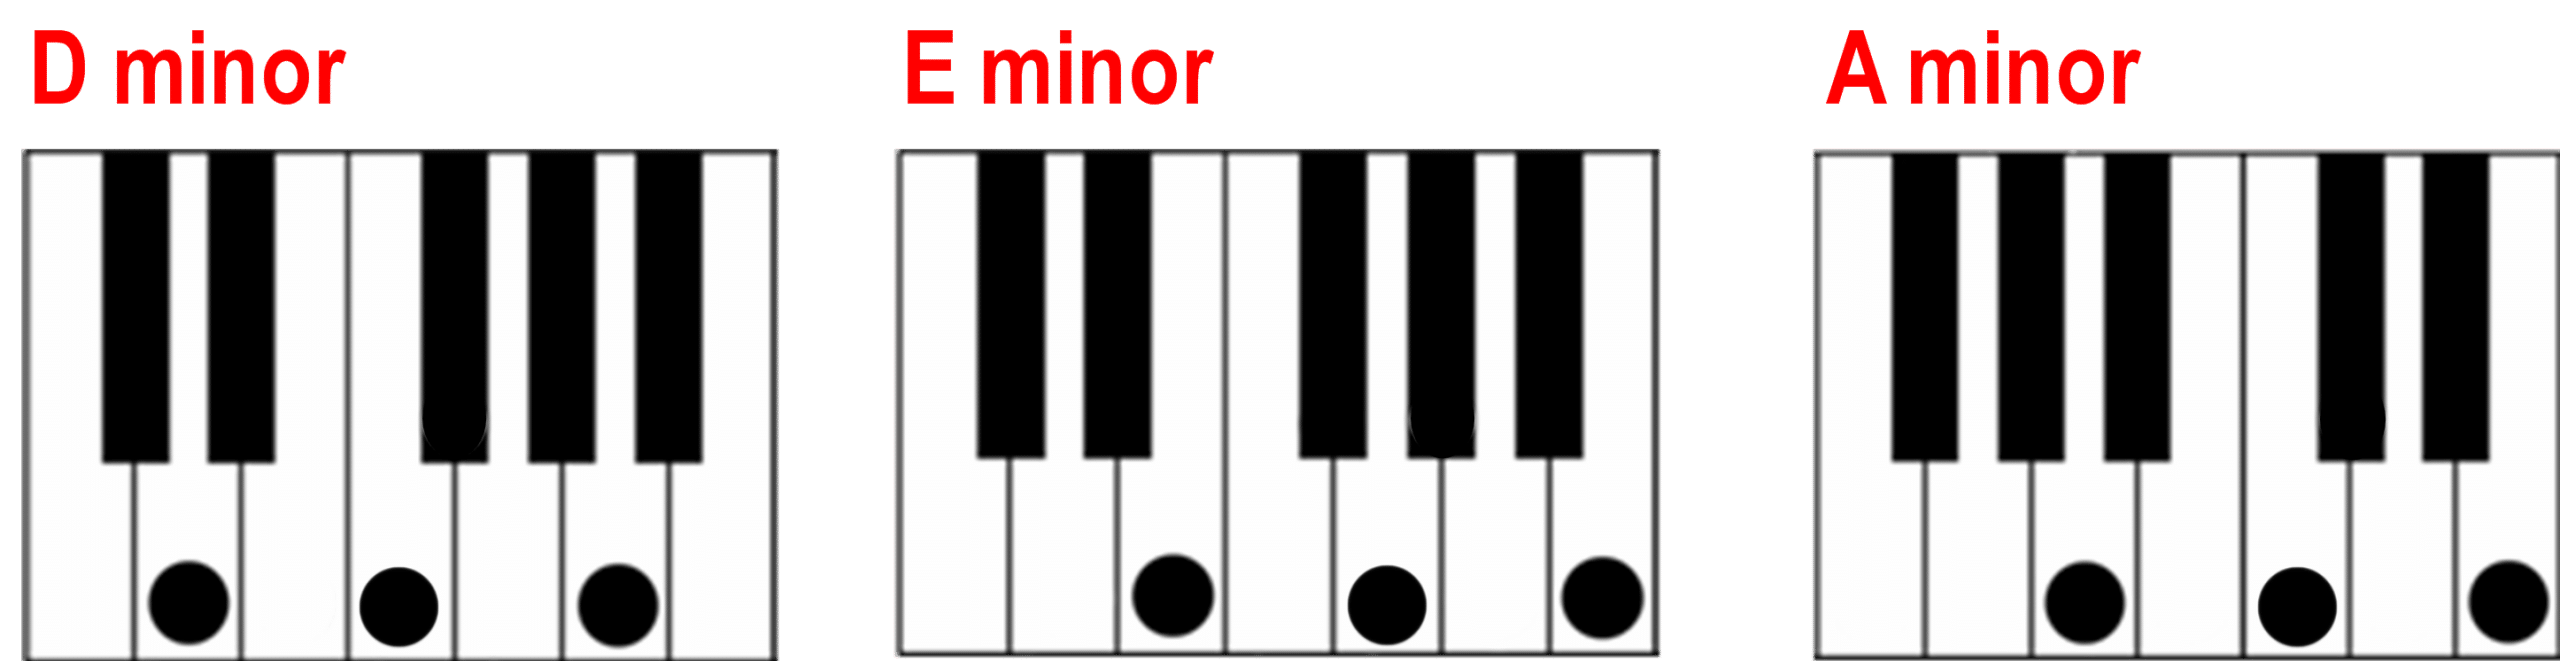 Type of chords in the minor key.